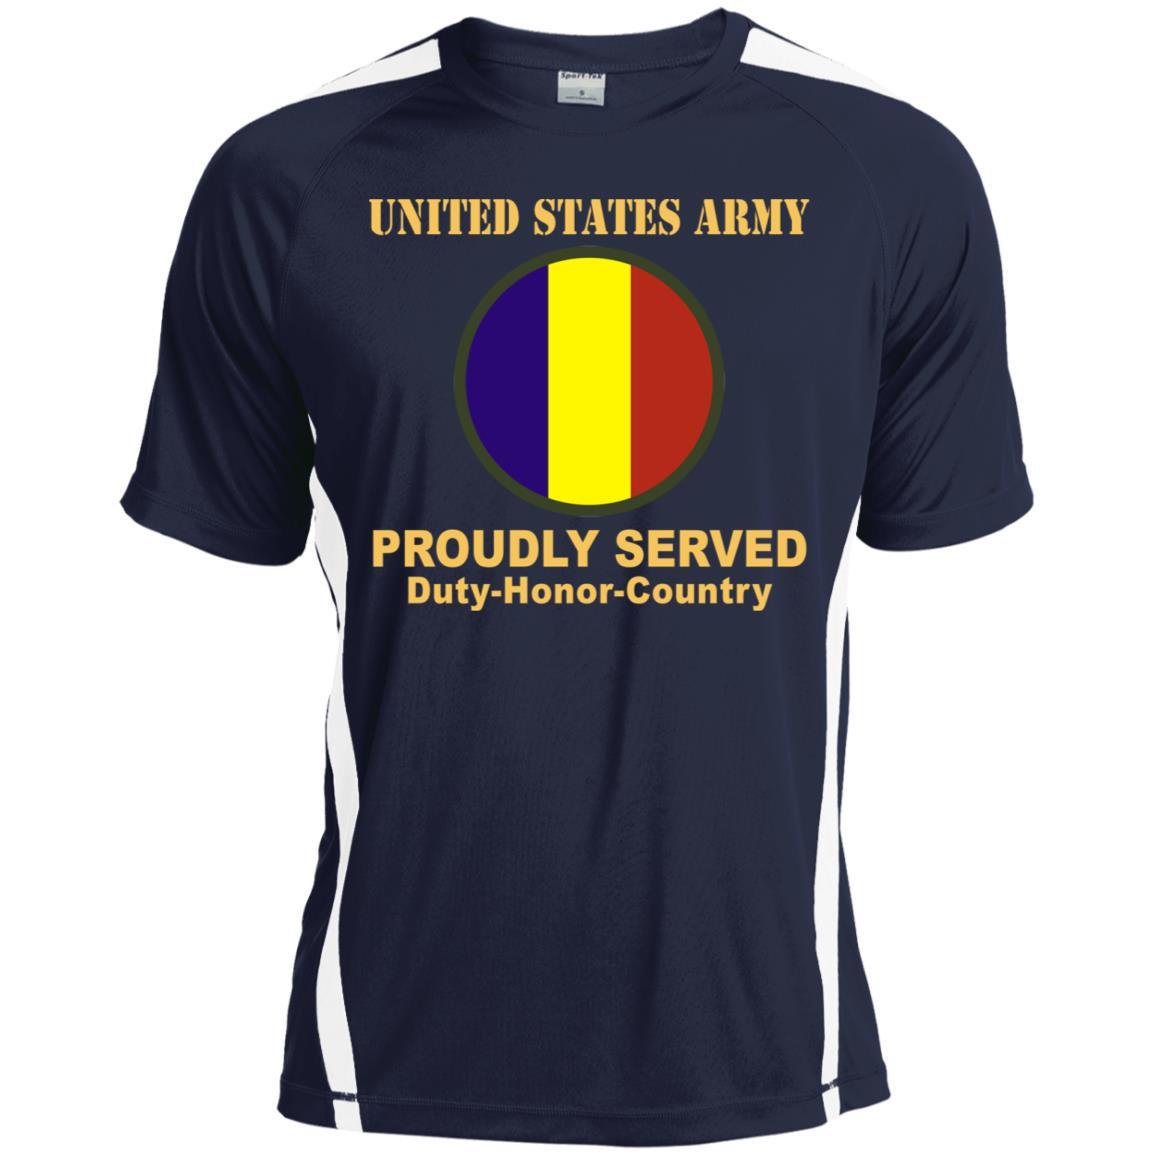 US ARMY TRAINING AND DOCTRINE COMMAND- Proudly Served T-Shirt On Front For Men-TShirt-Army-Veterans Nation